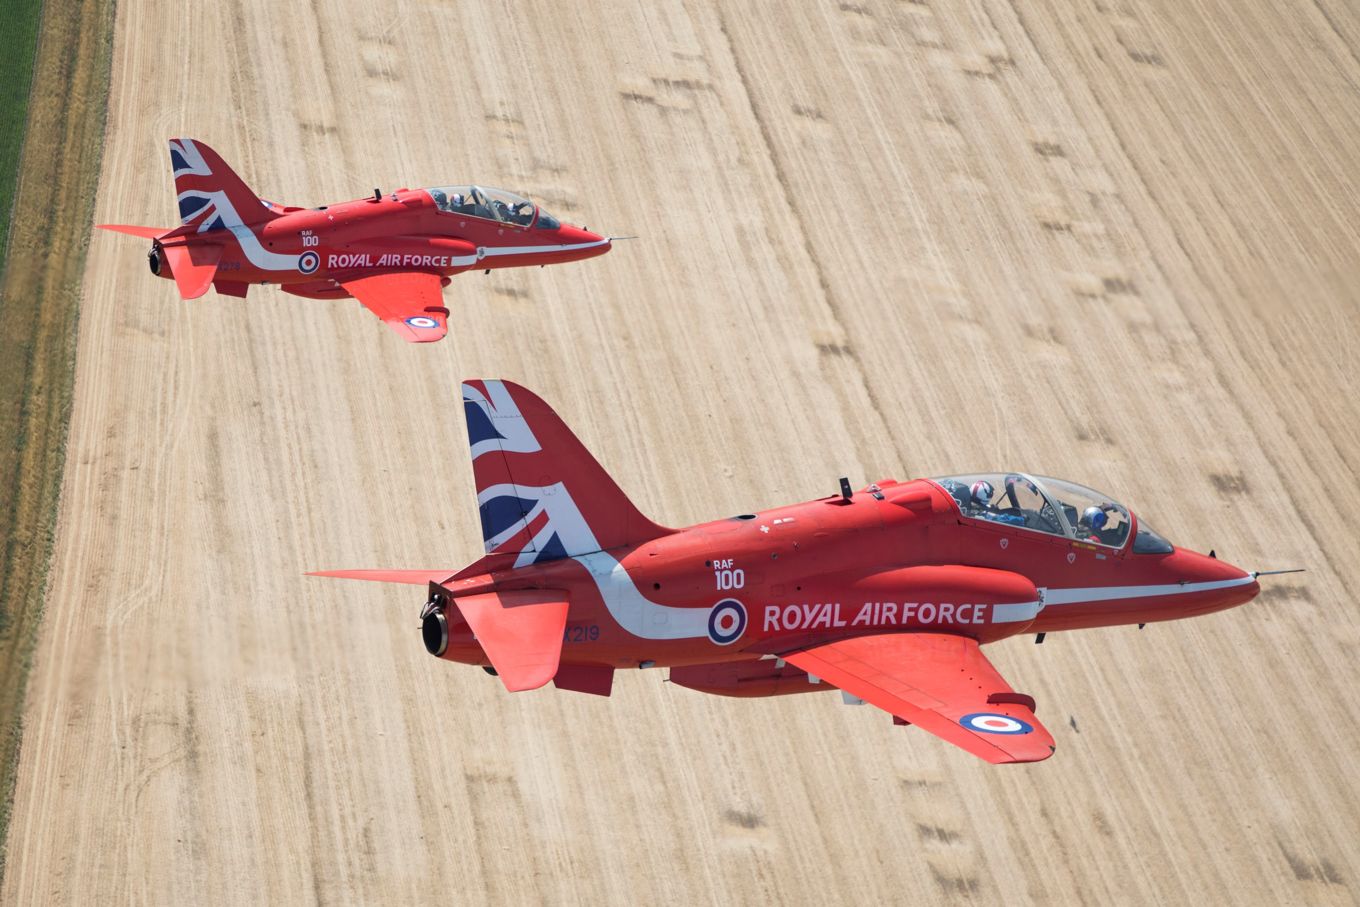 The Red Arrows use the BAE Systems Hawk T1.